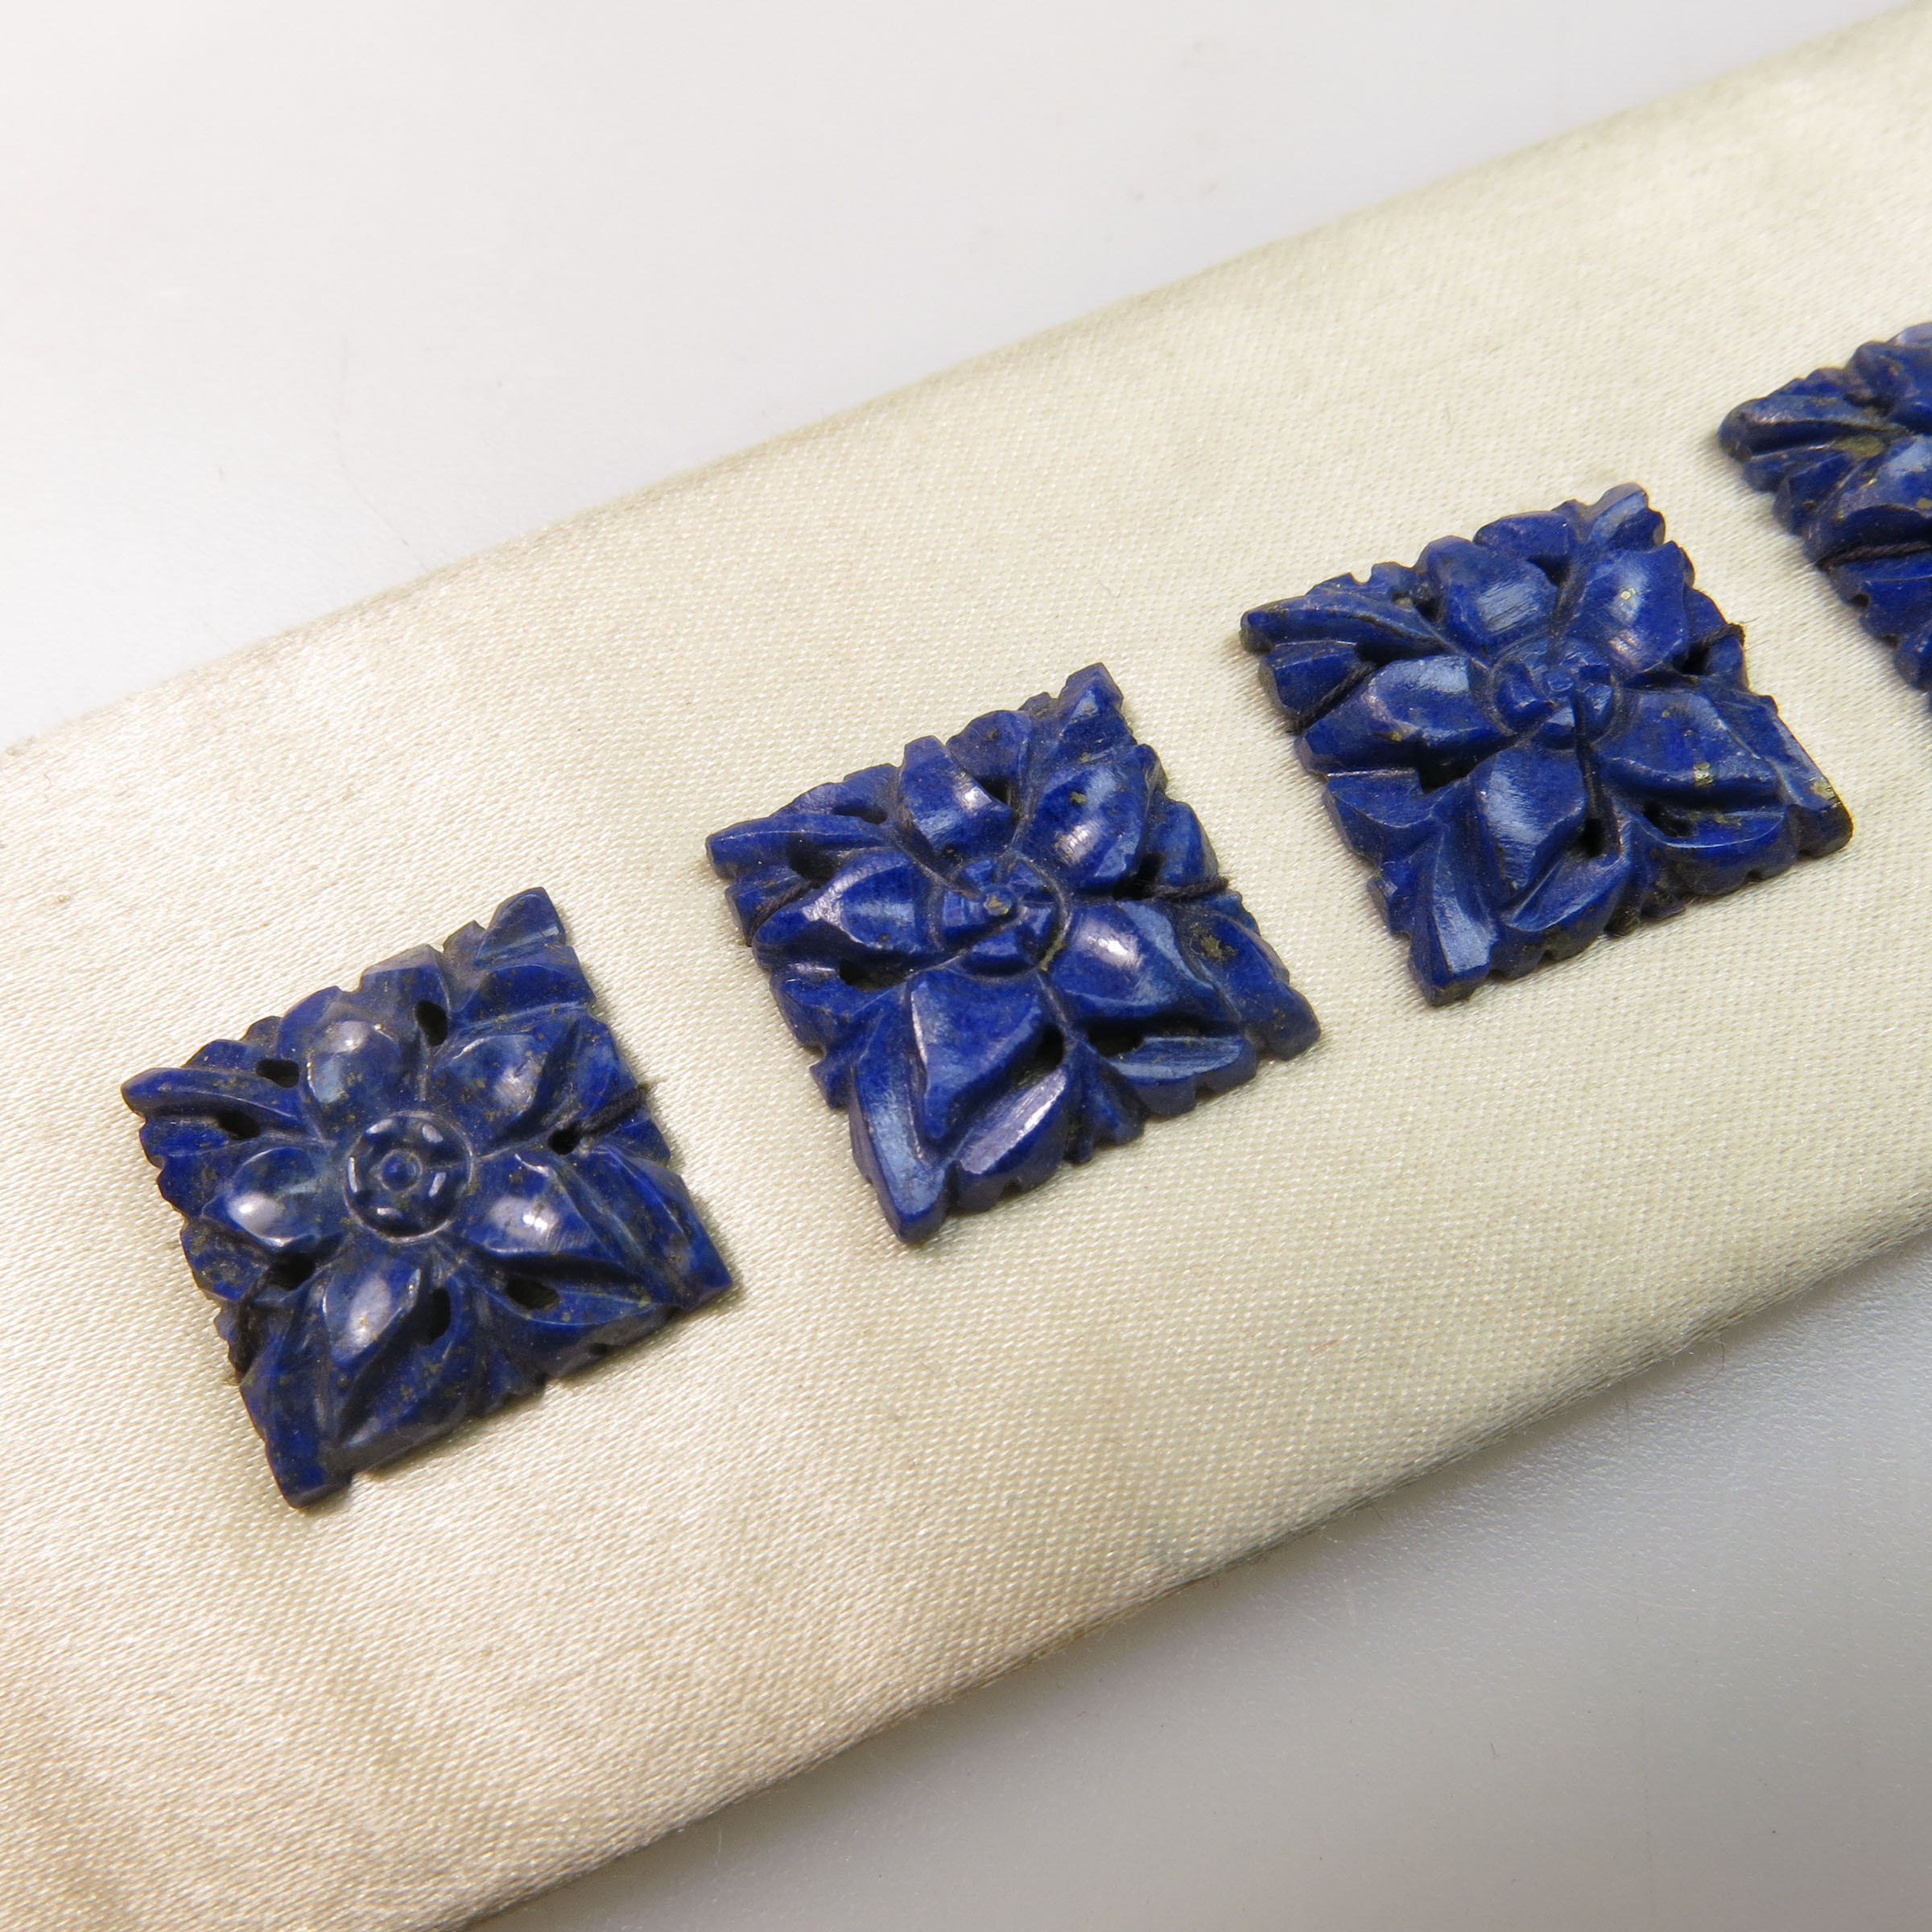 7 Sets Of 6 Various Shaped Carved And Pierced Lapis Panels